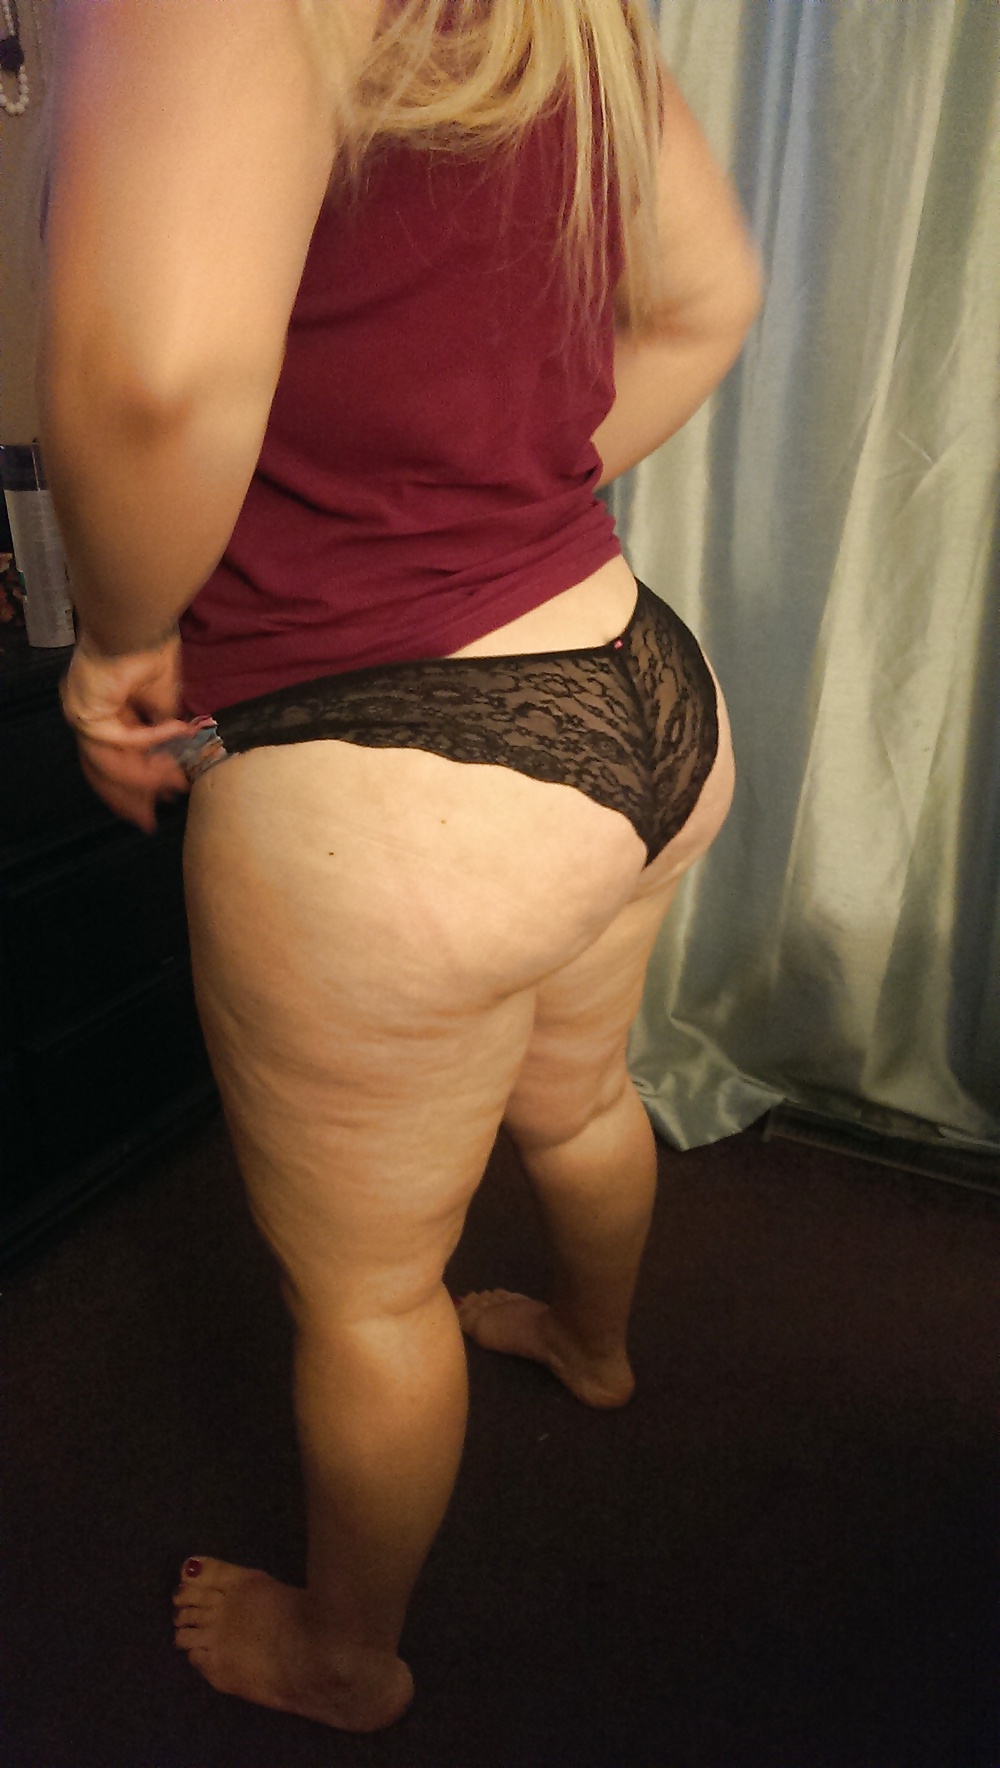 Pawg in new thong #19866537